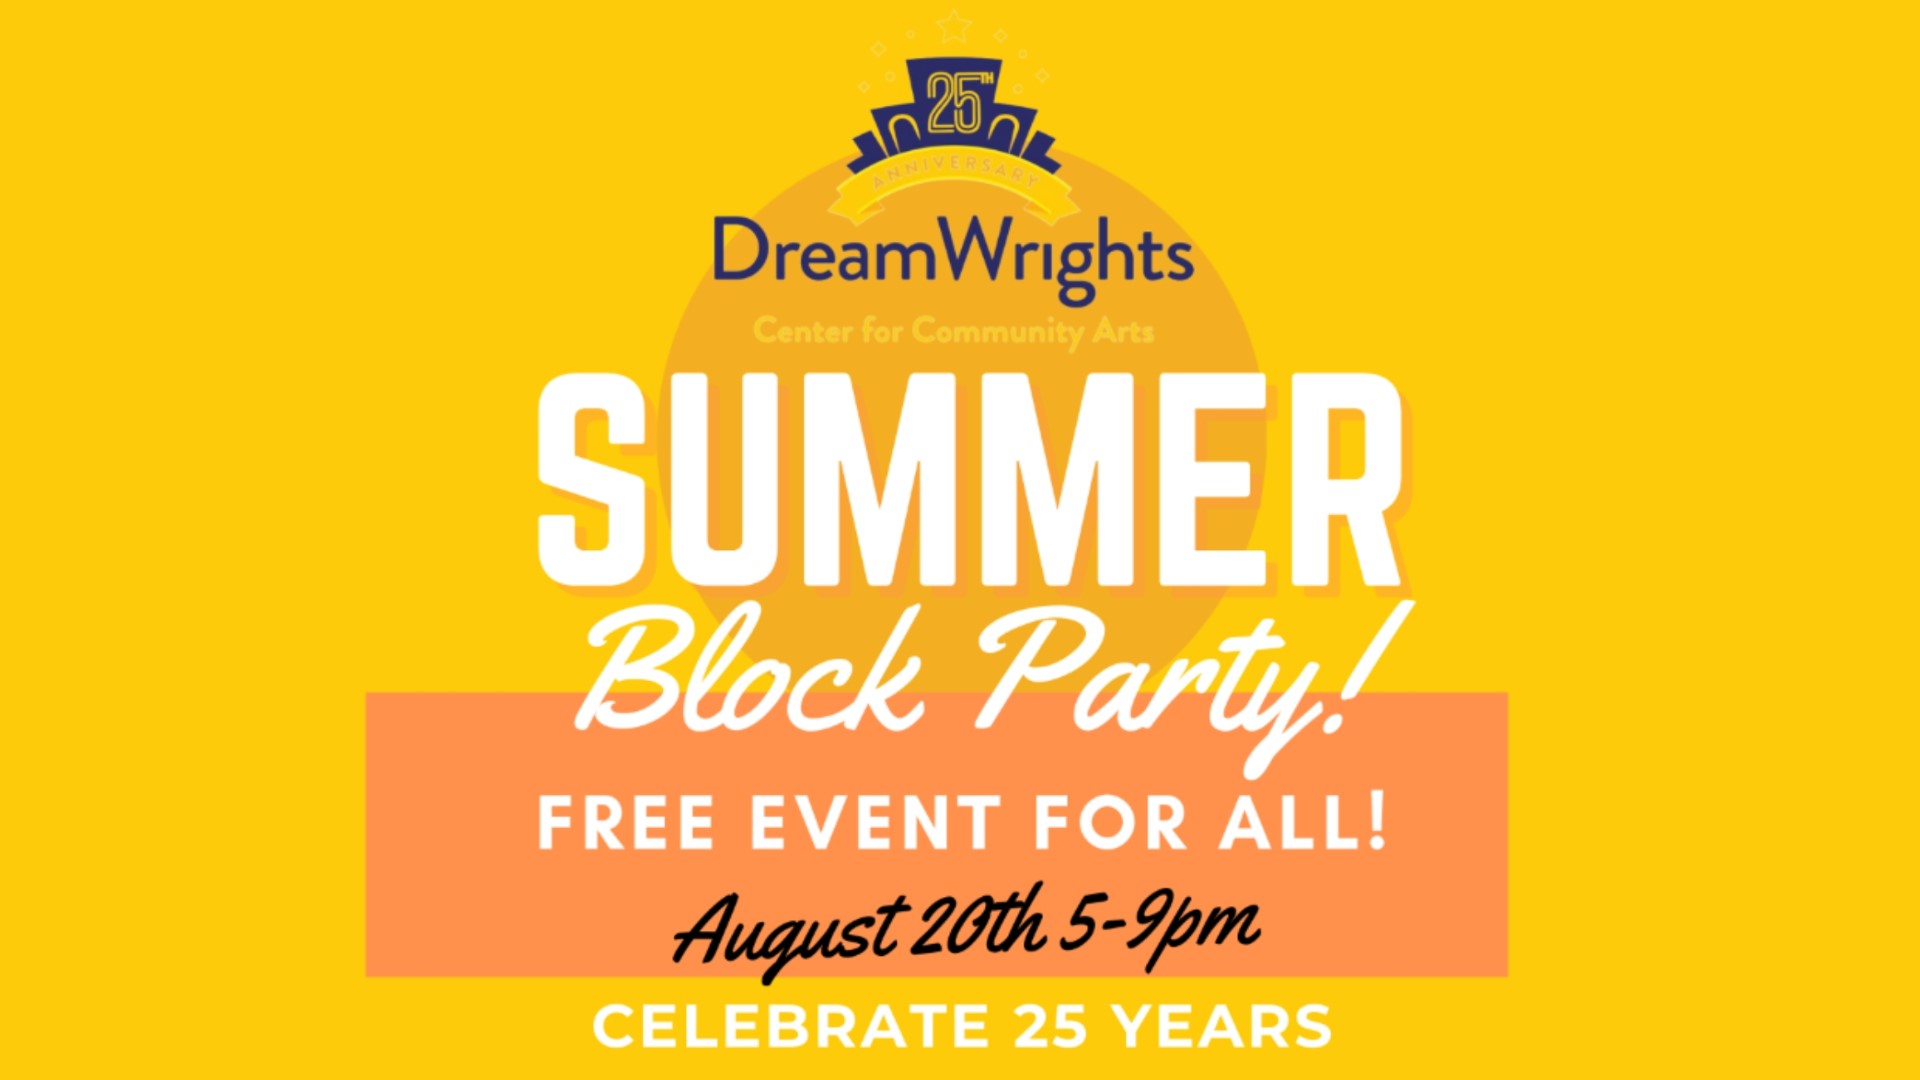 The DreamWrights Center for Community Arts is celebrating their 25th anniversary this weekend by hosting a free summer block party from 5 to 9 p.m.